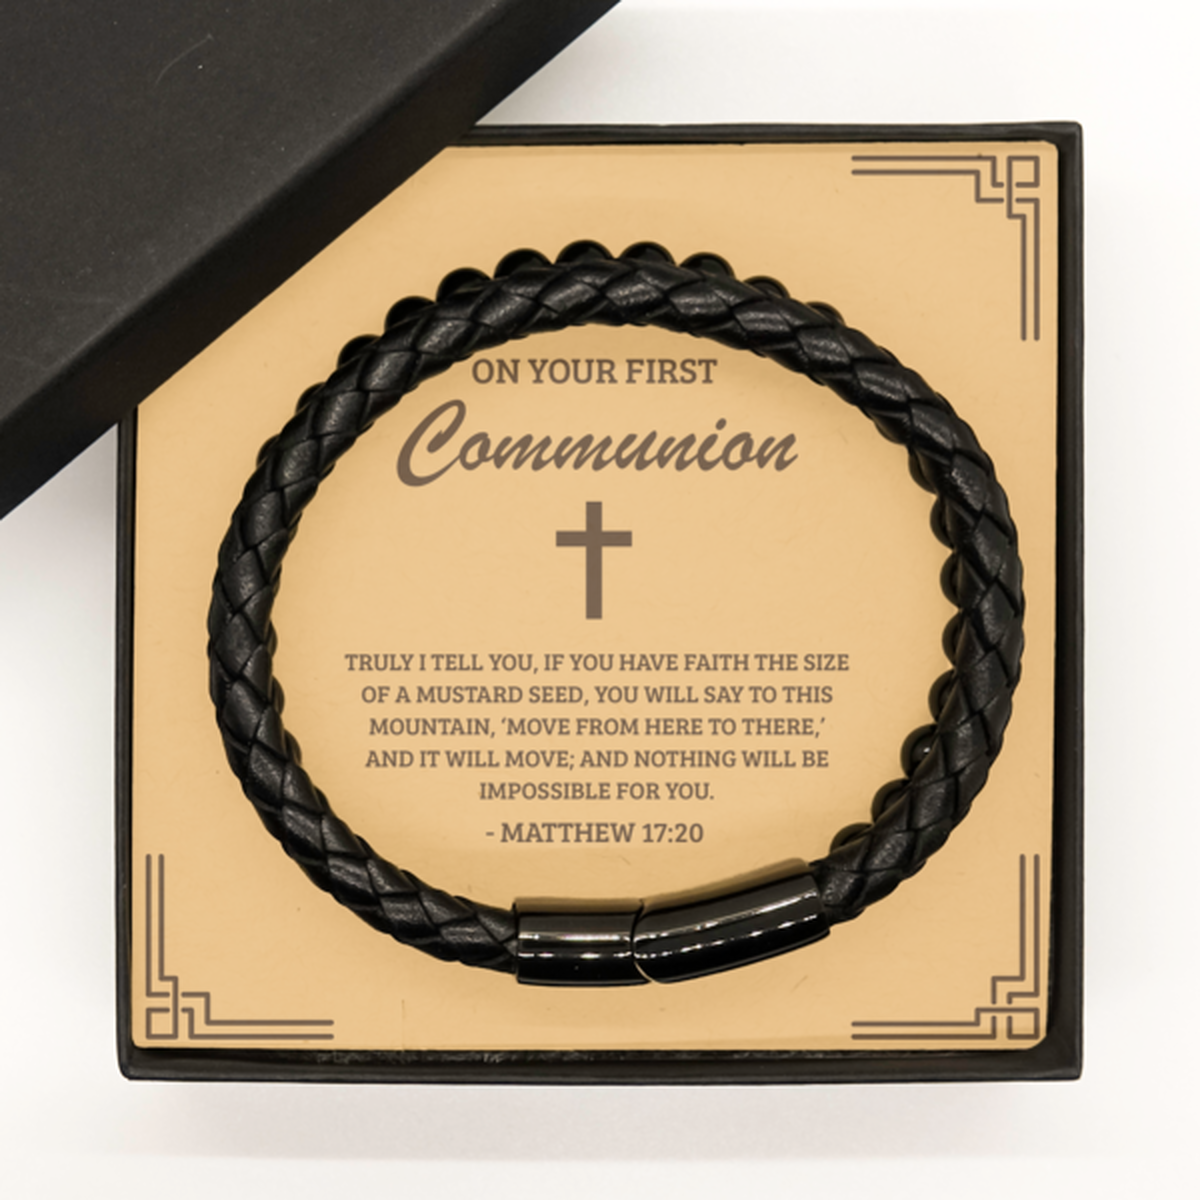 First Communion Gifts for Teenage Boys, Truly I tell you, if you have faith, Stone Leather Bracelet with Bible Verse Message Card, Religious Catholic Bracelet for Son, Grandson, Dad, Godfather